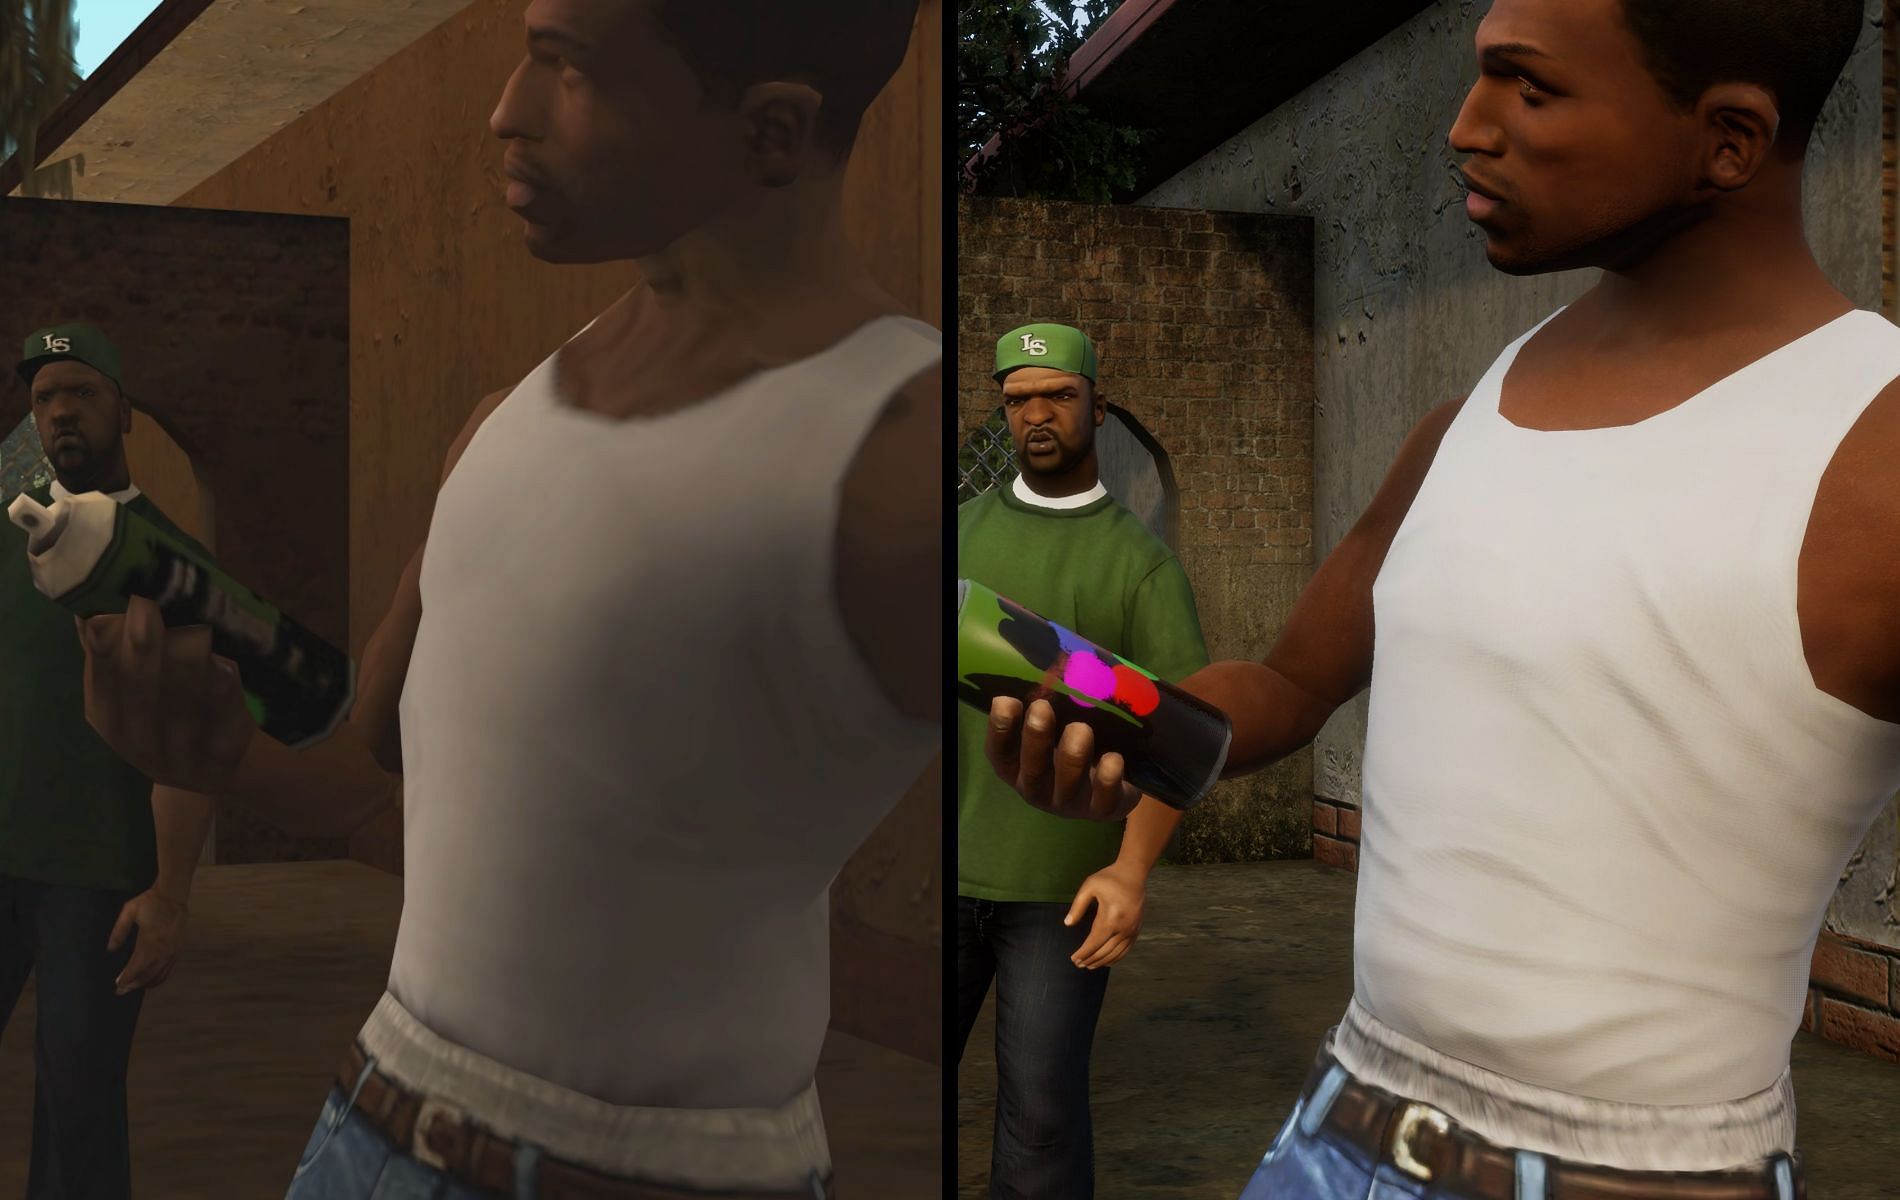 GTA San Andreas on the left, the GTA Trilogy on the right (Image via Rockstar Games)